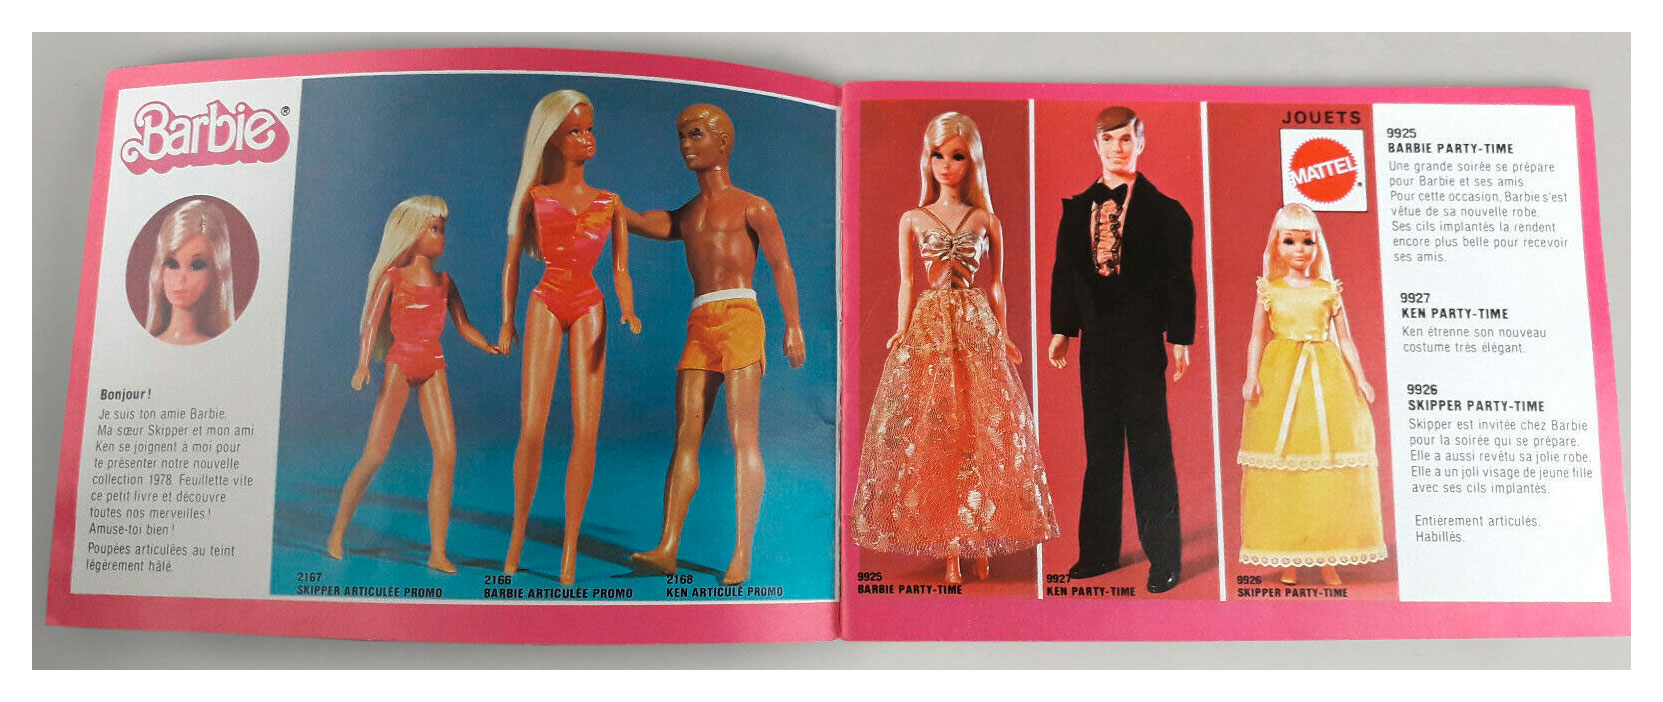 From 1978 French Barbie booklet